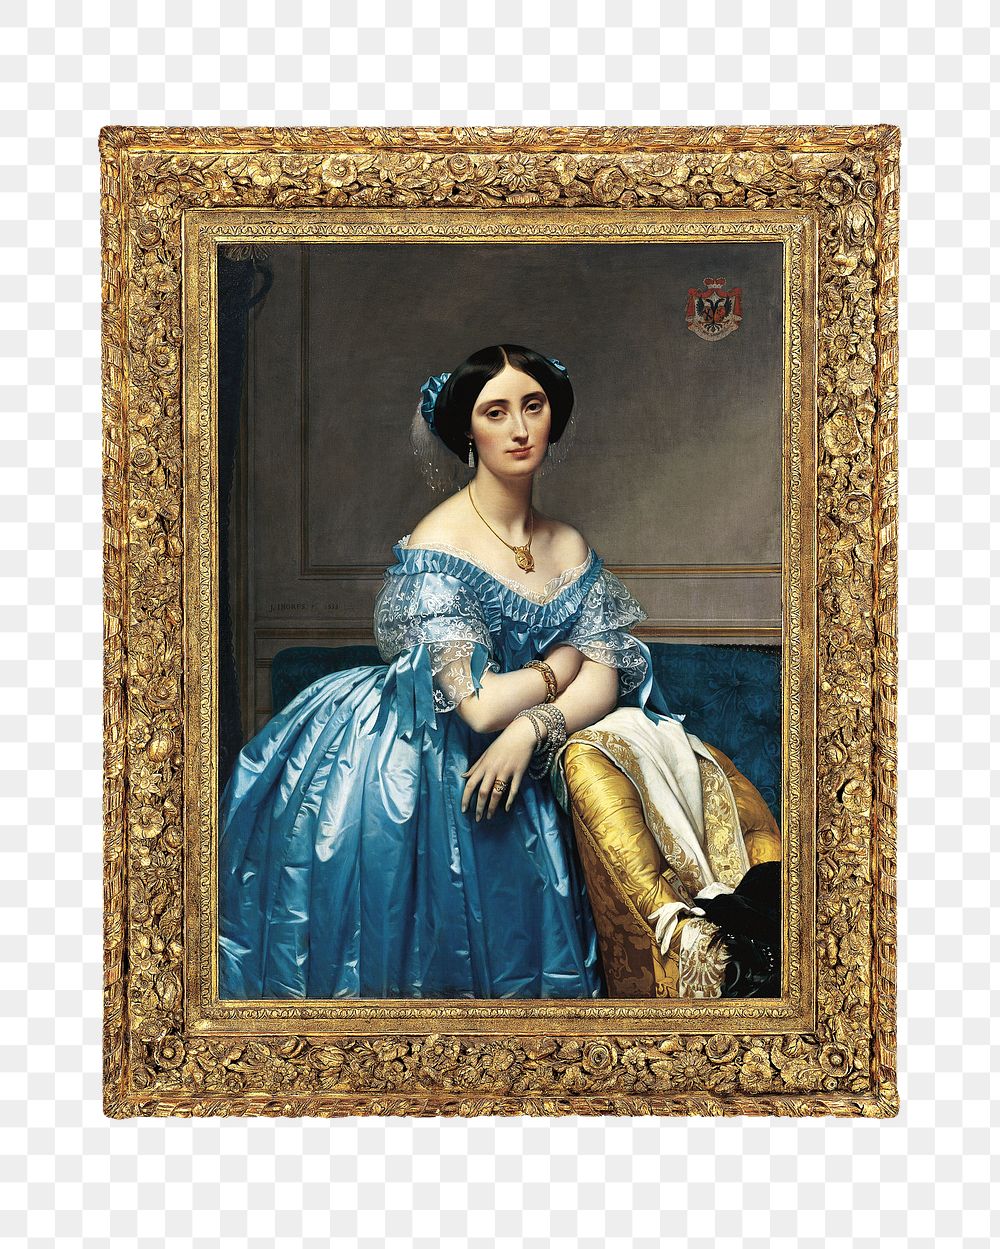 Louis XIII style png Ovolo frame, vintage woman portrait on transparent background. Remixed by rawpixel.